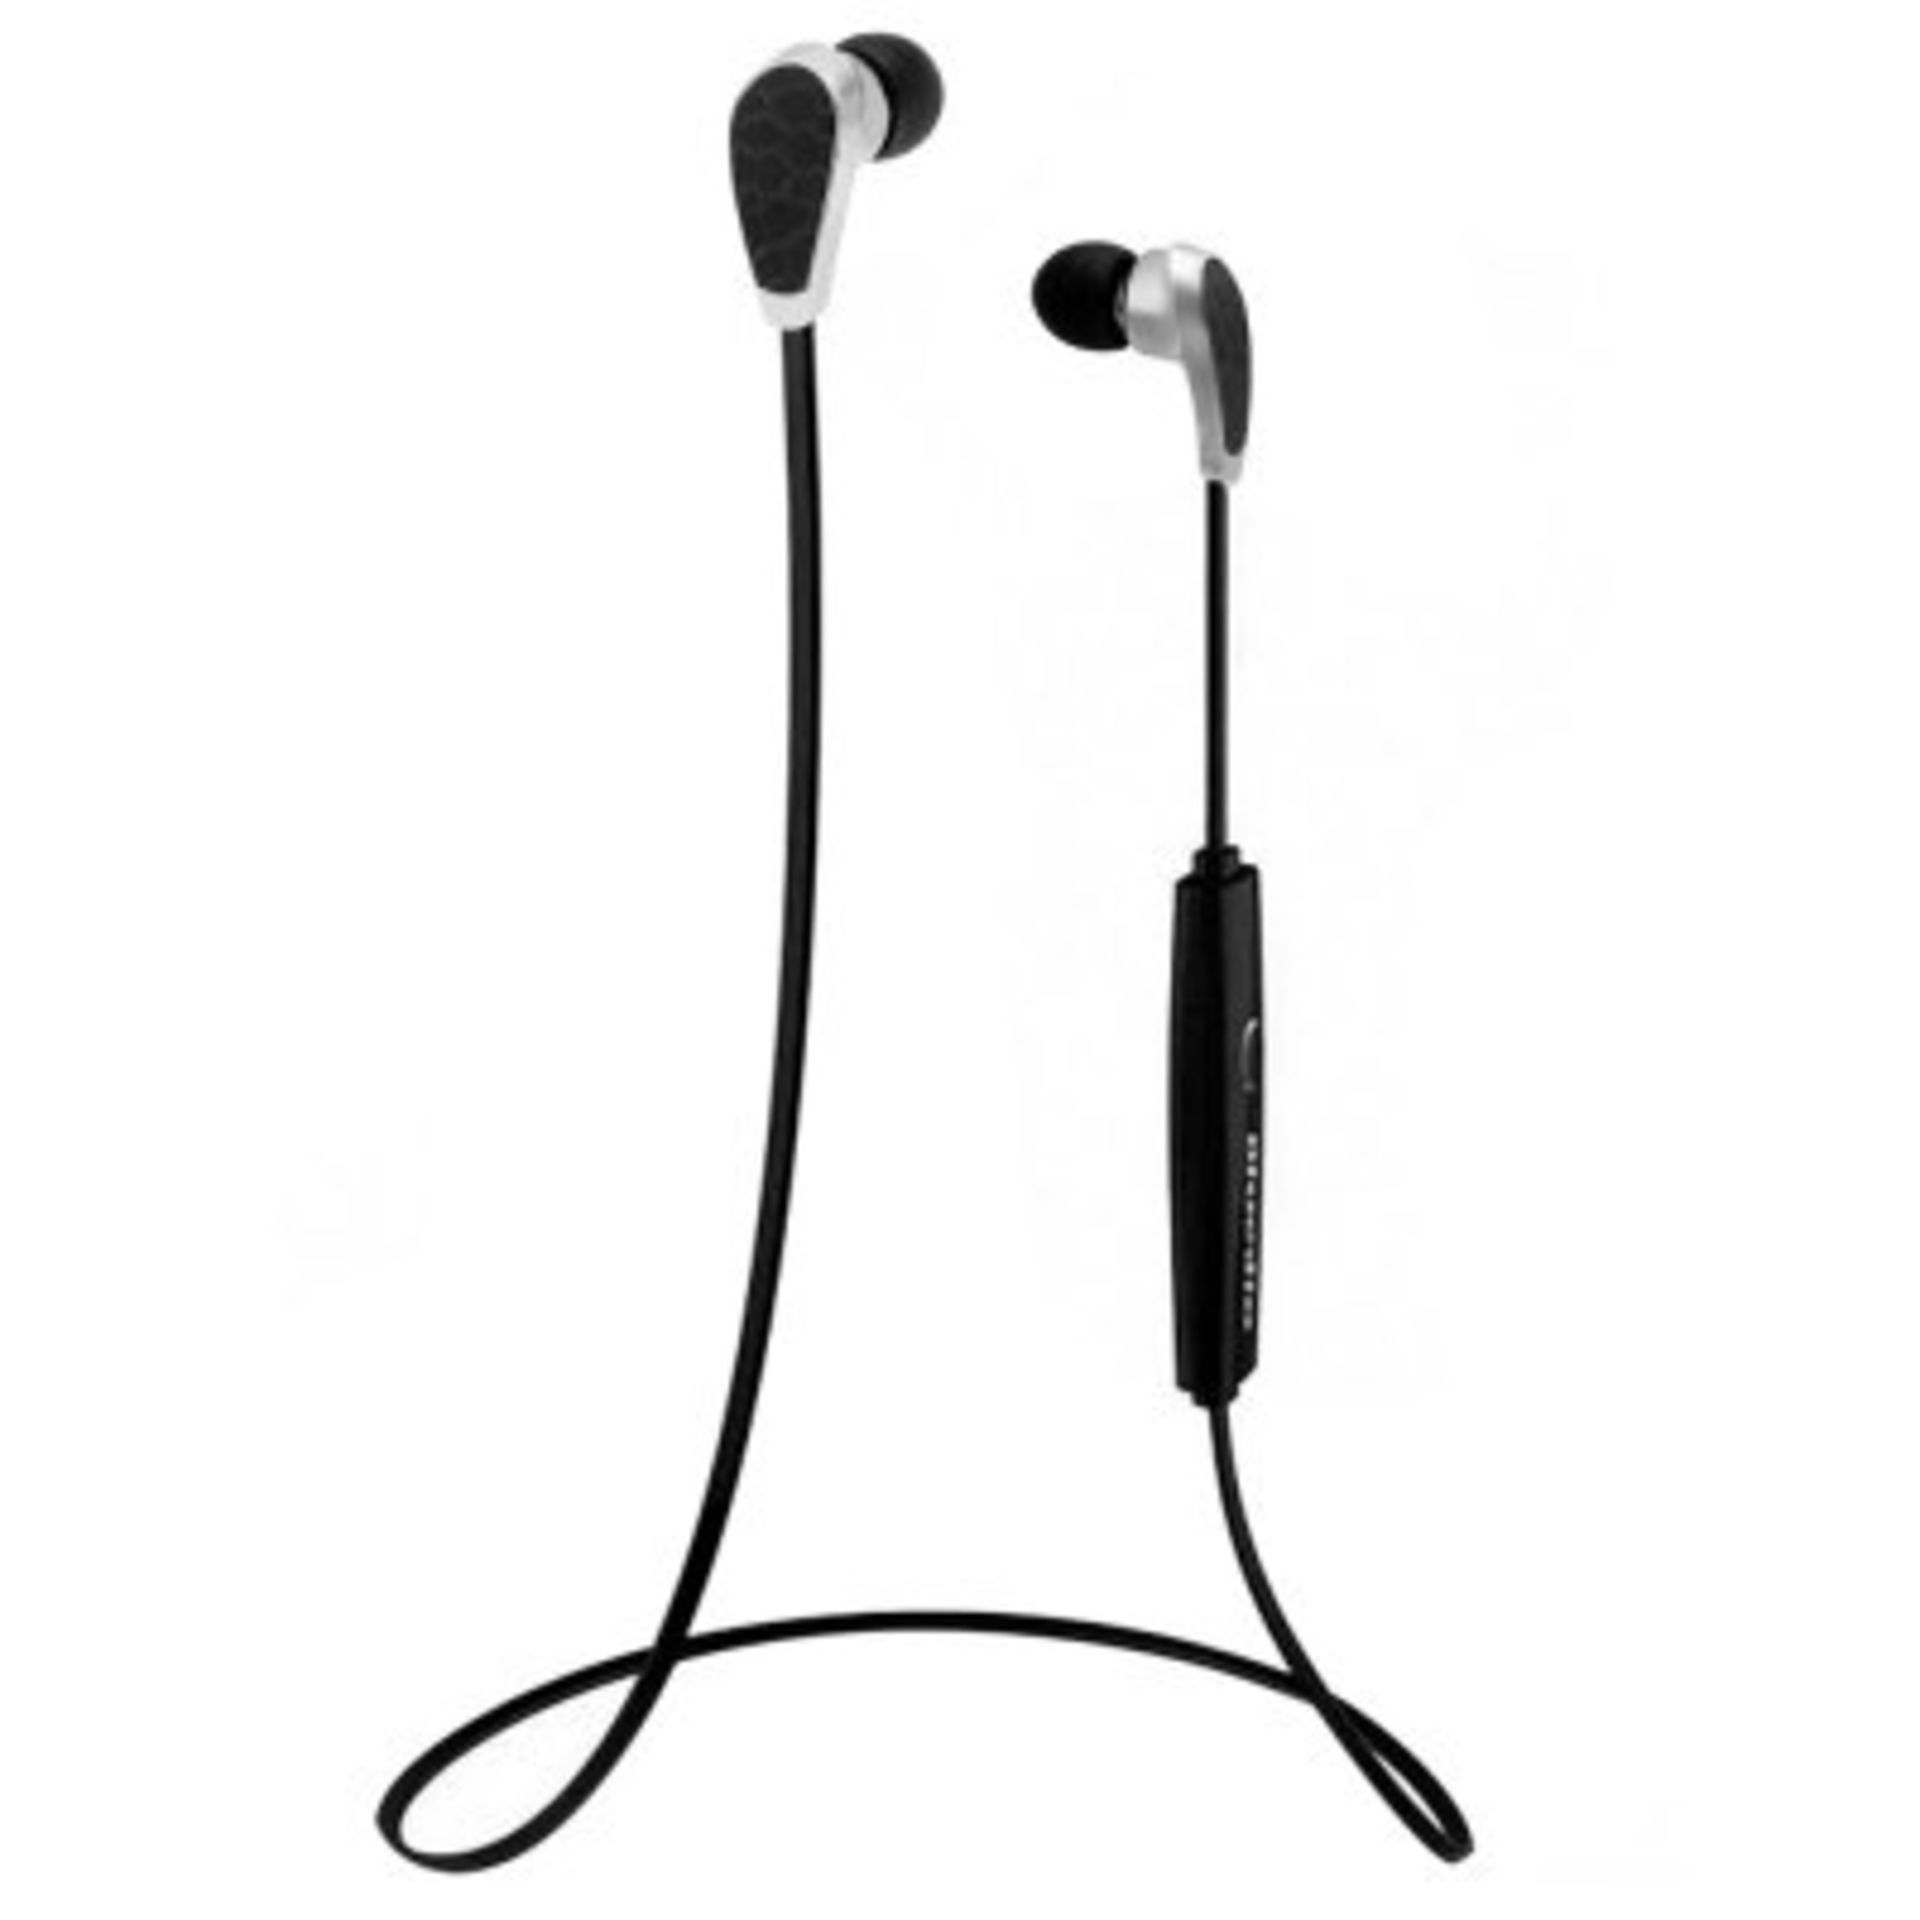 V Grade A Pair of Bluetooth Earphones/Headset (All Boxed) - Colours and Styles/Makes May Vary - Some - Image 5 of 7